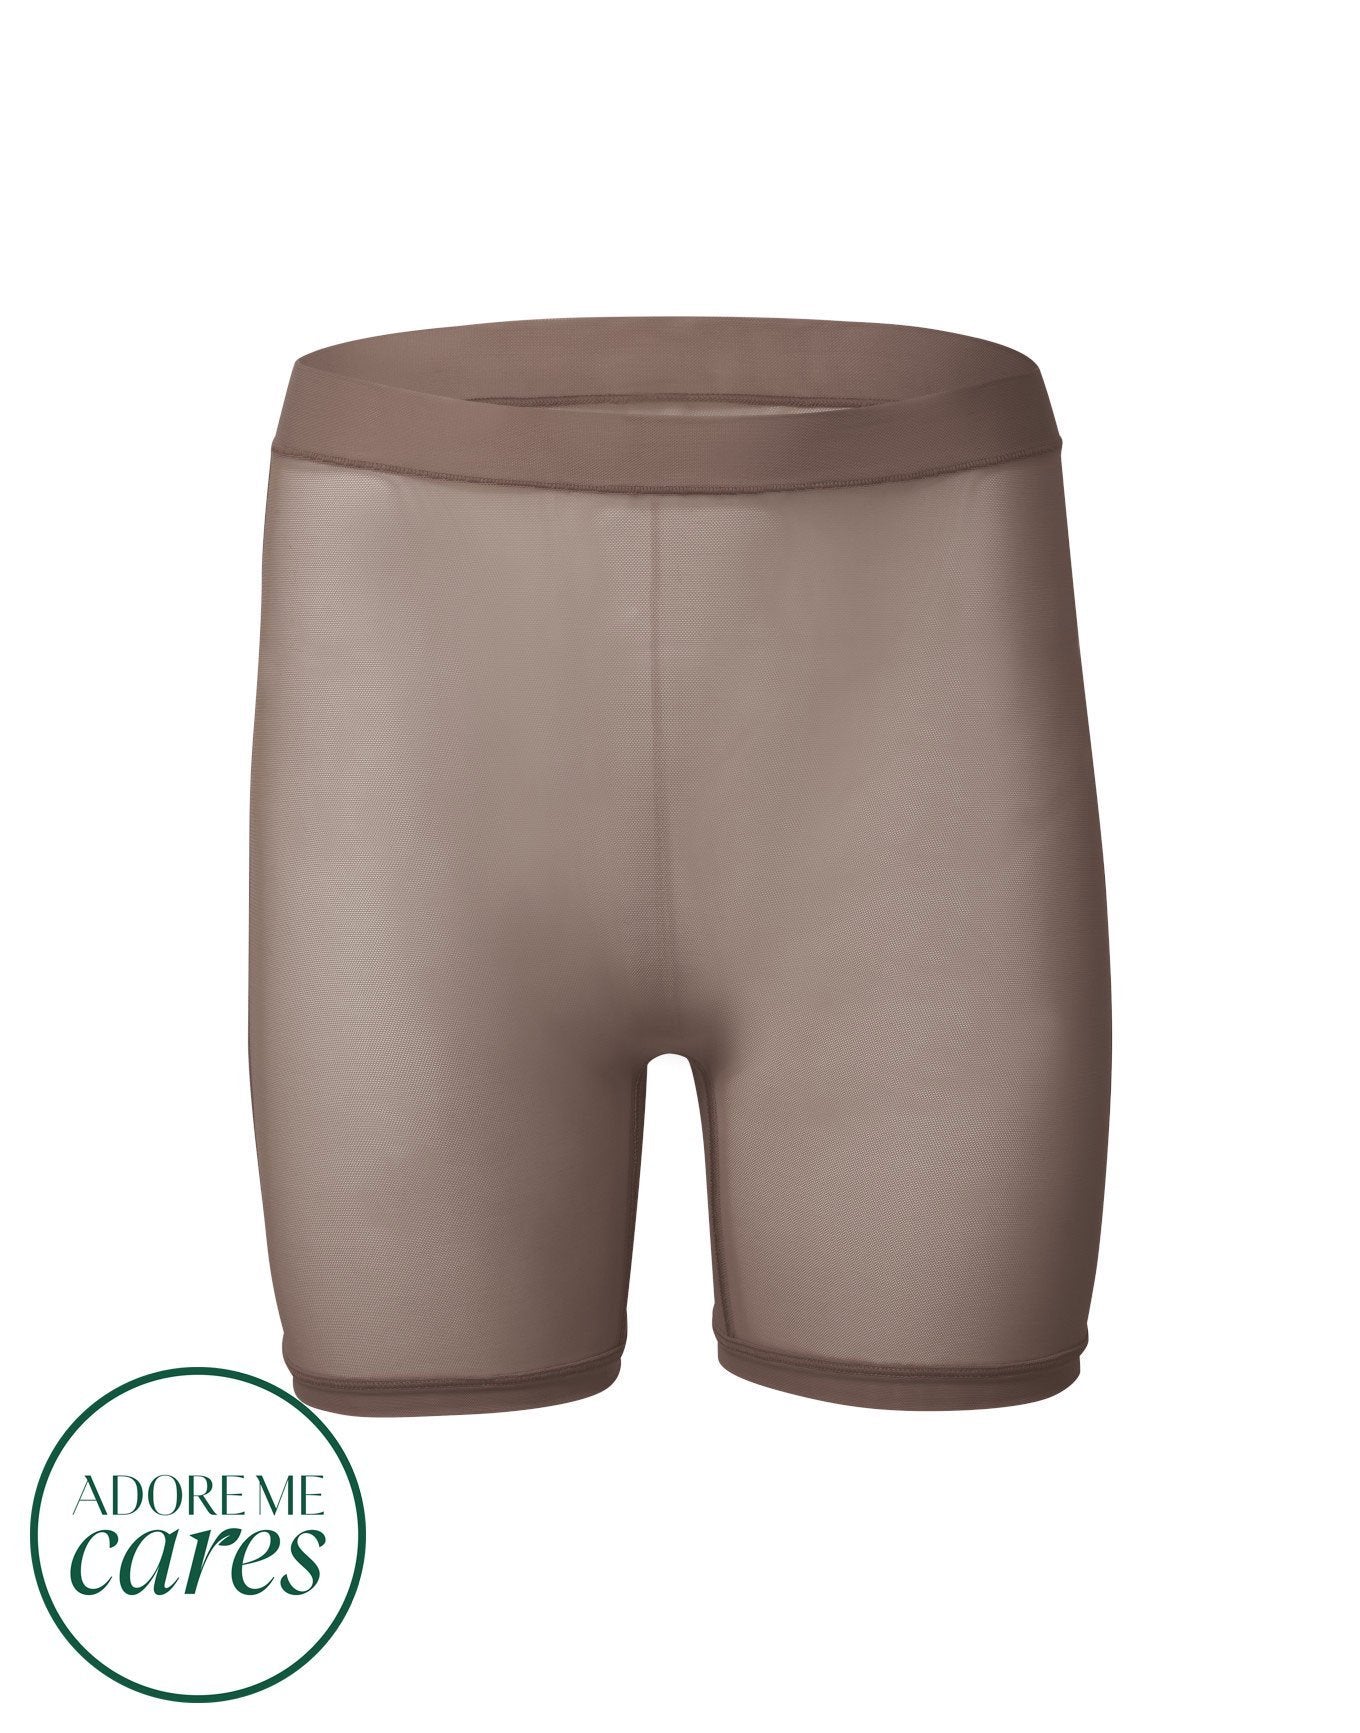 nueskin Dina Mesh High-Rise Shortie in color Deep Taupe and shape shortie